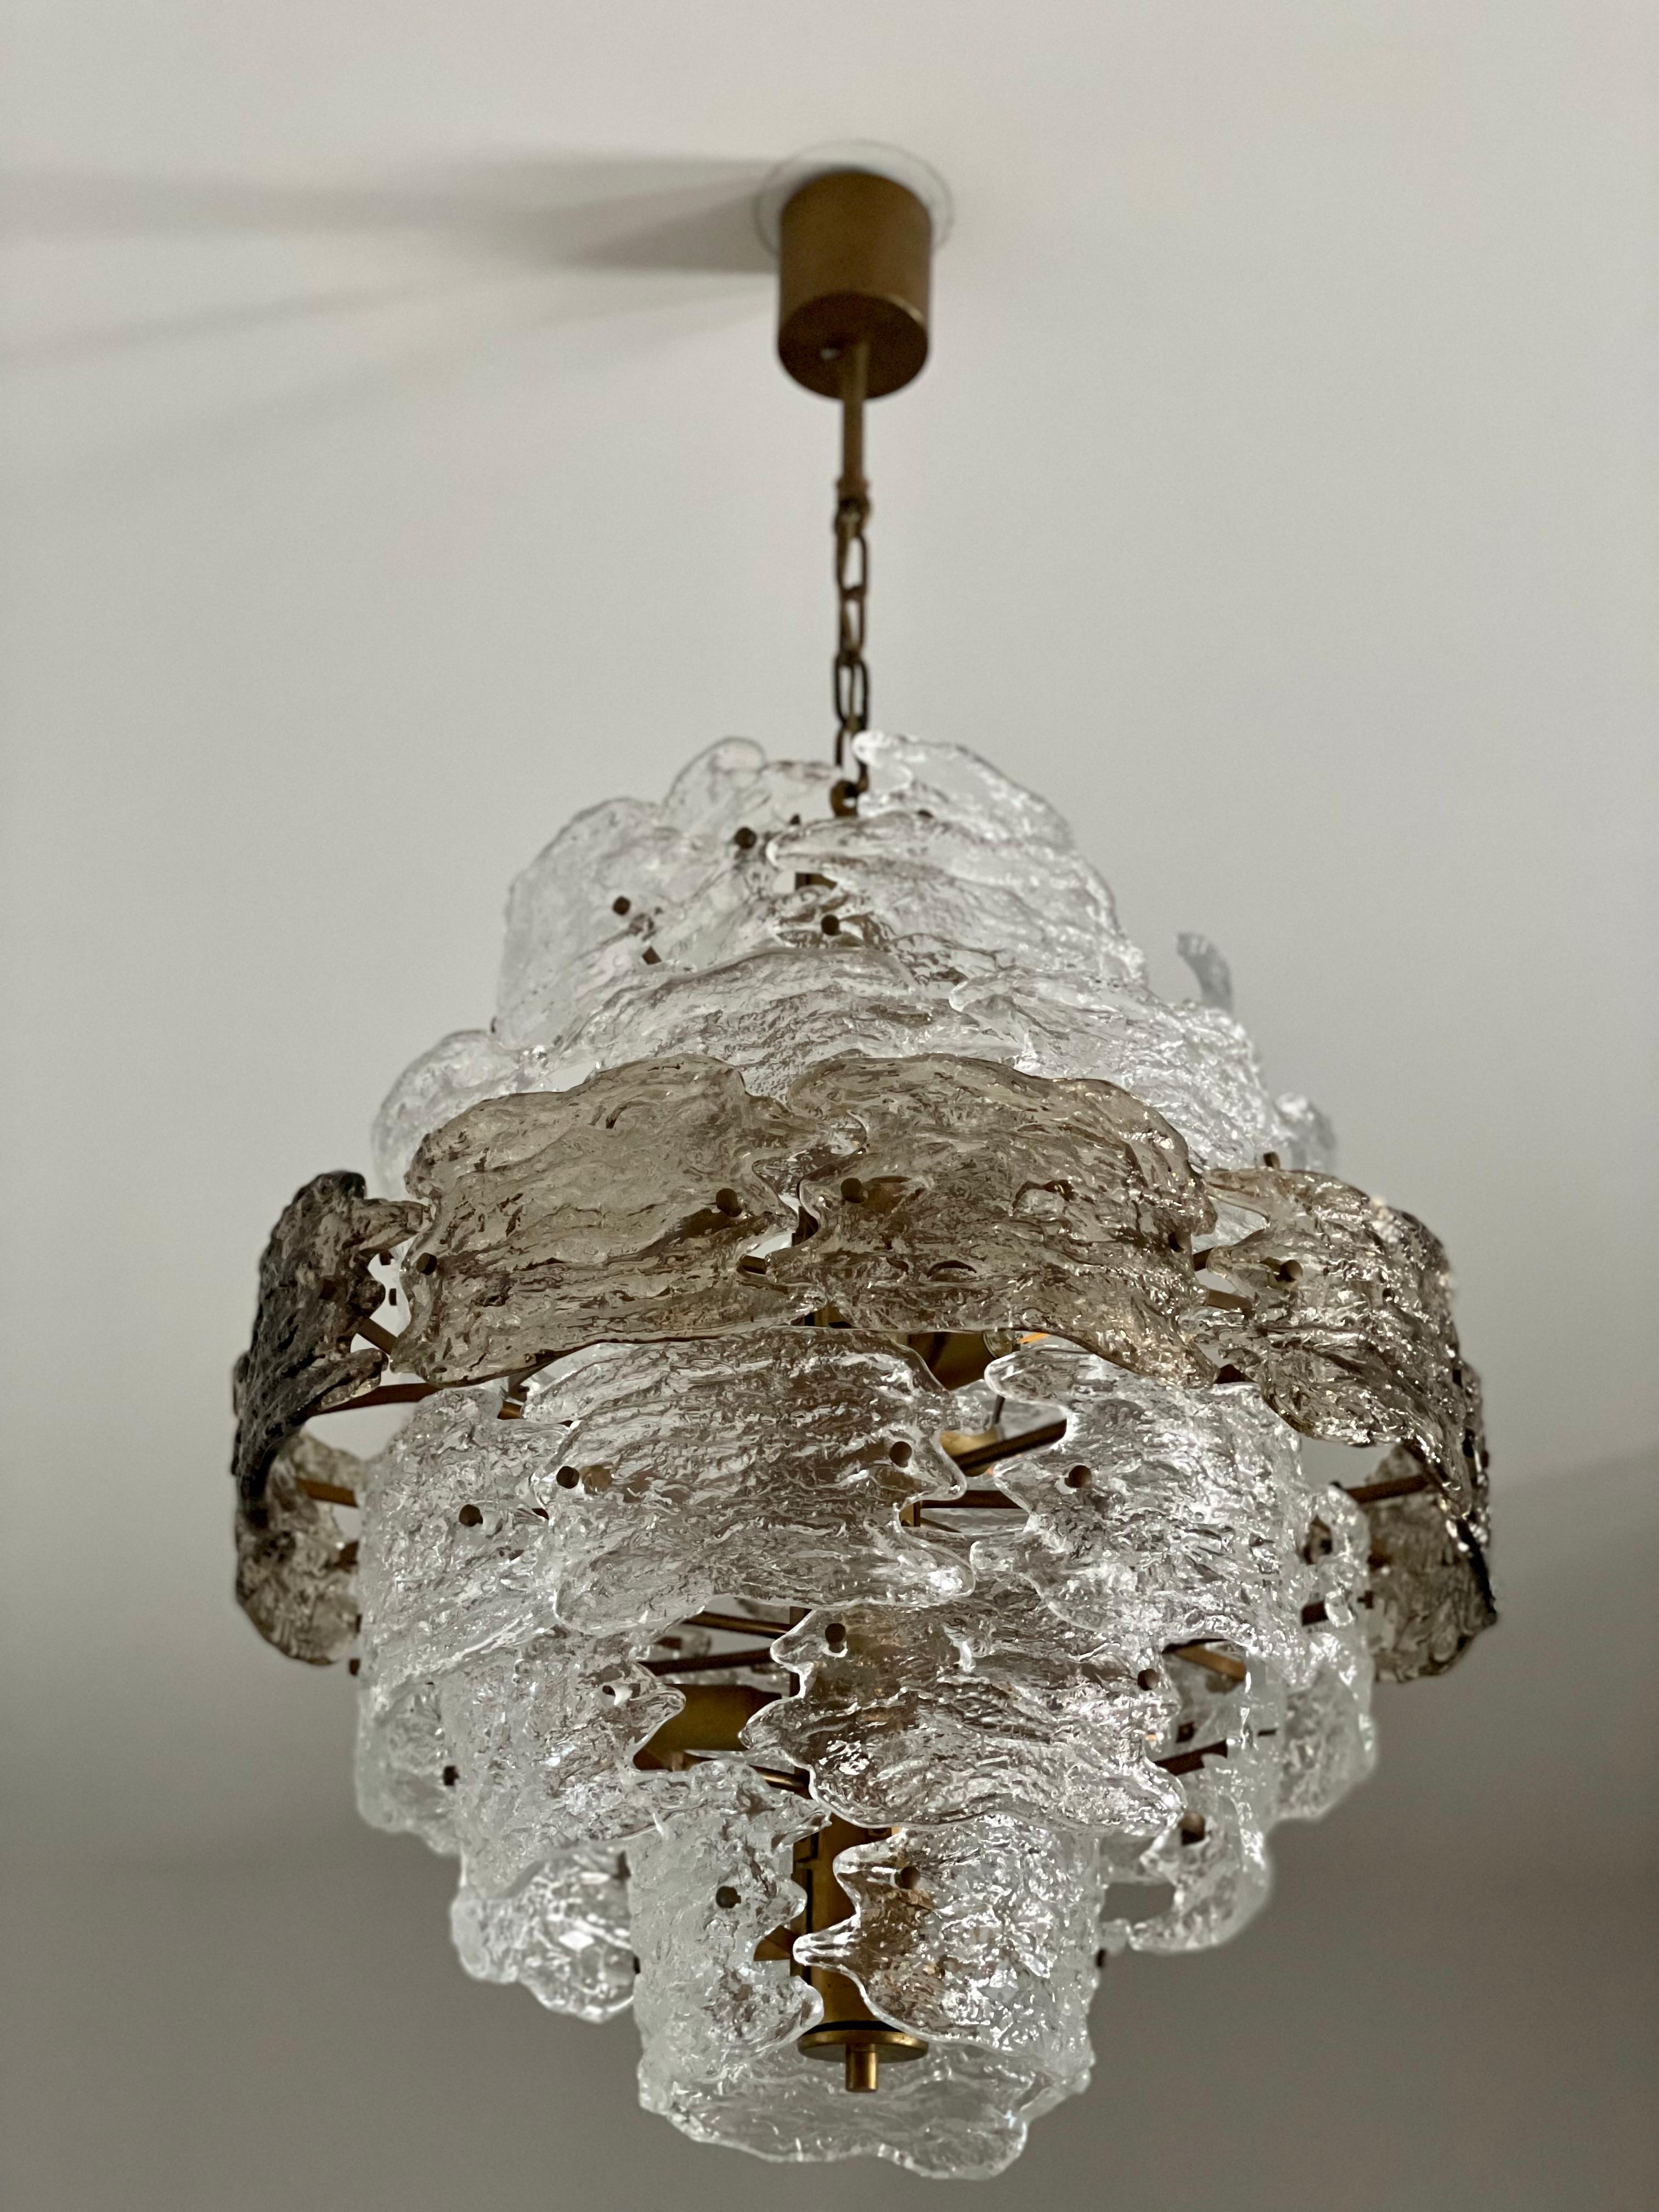 The Vintage Mazzega Chandelier, crafted with exquisite Murano glass in the 1970s, captivates with its beauty. Its remarkable form, resembling sparkling crystal, brings an element of refined luxury to the interior.

Every meticulously crafted glass